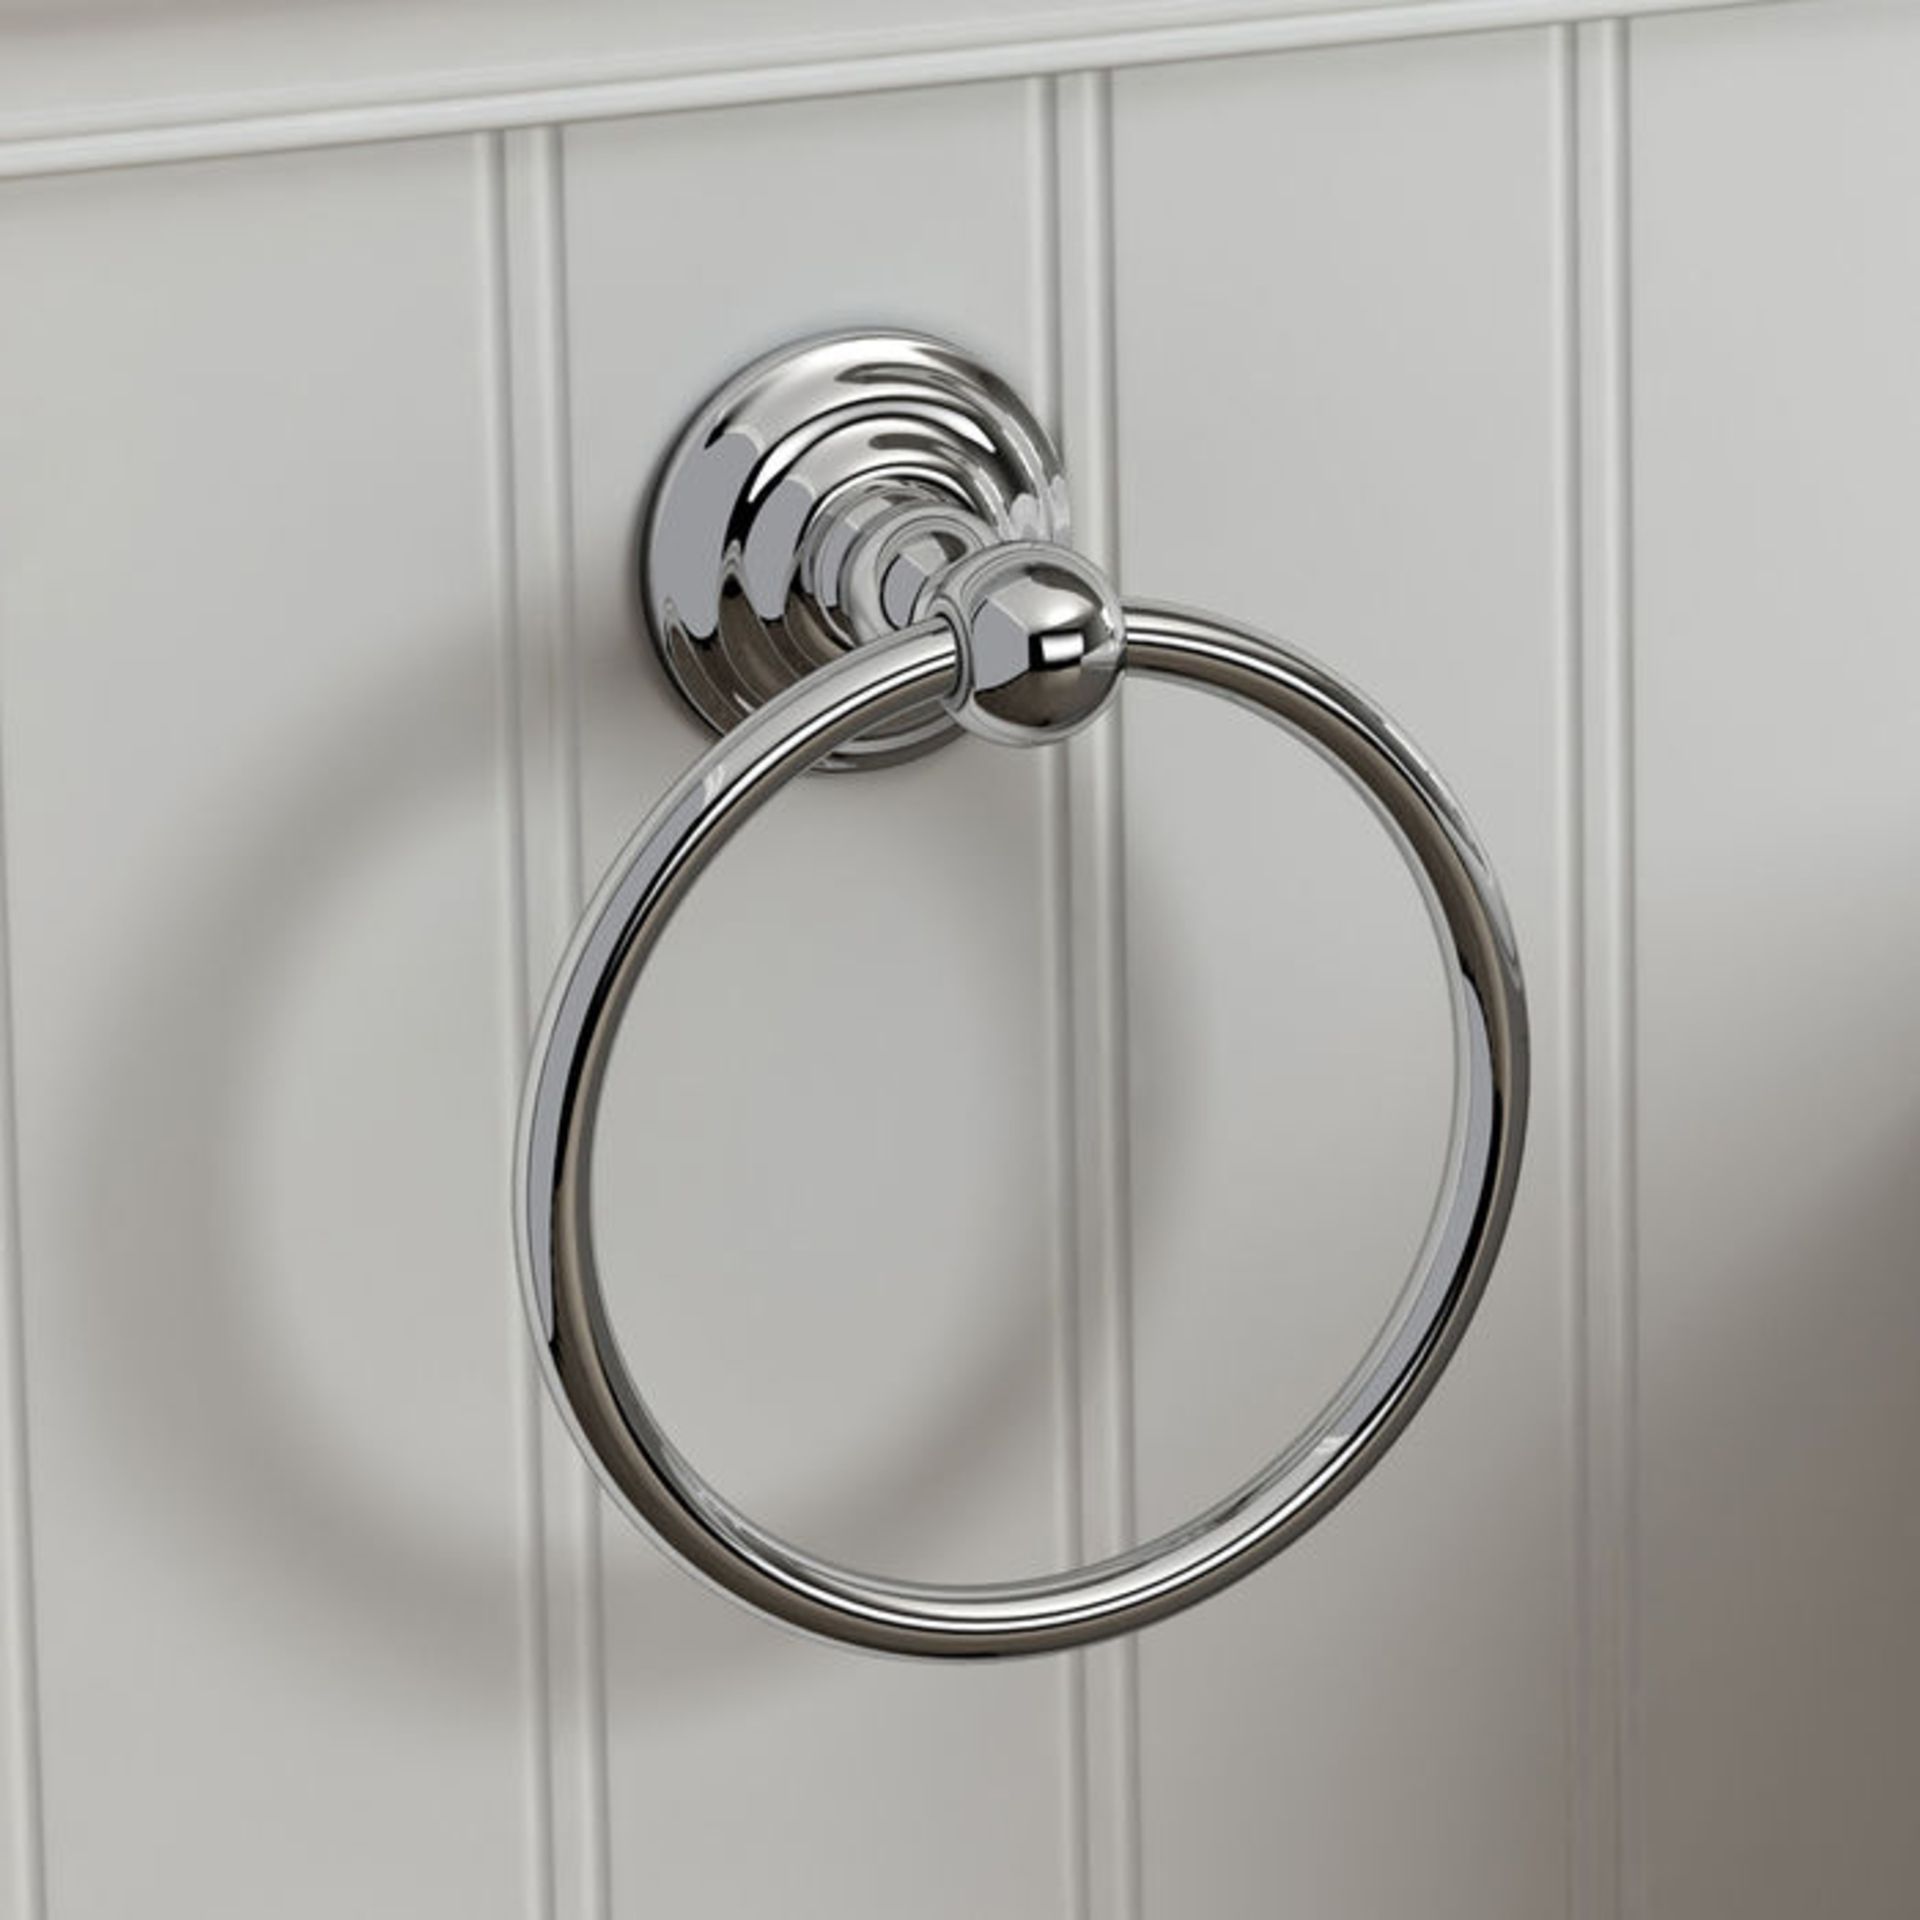 (PJ73) York Towel Ring Finishes your bathroom with a little extra functionality and style Made